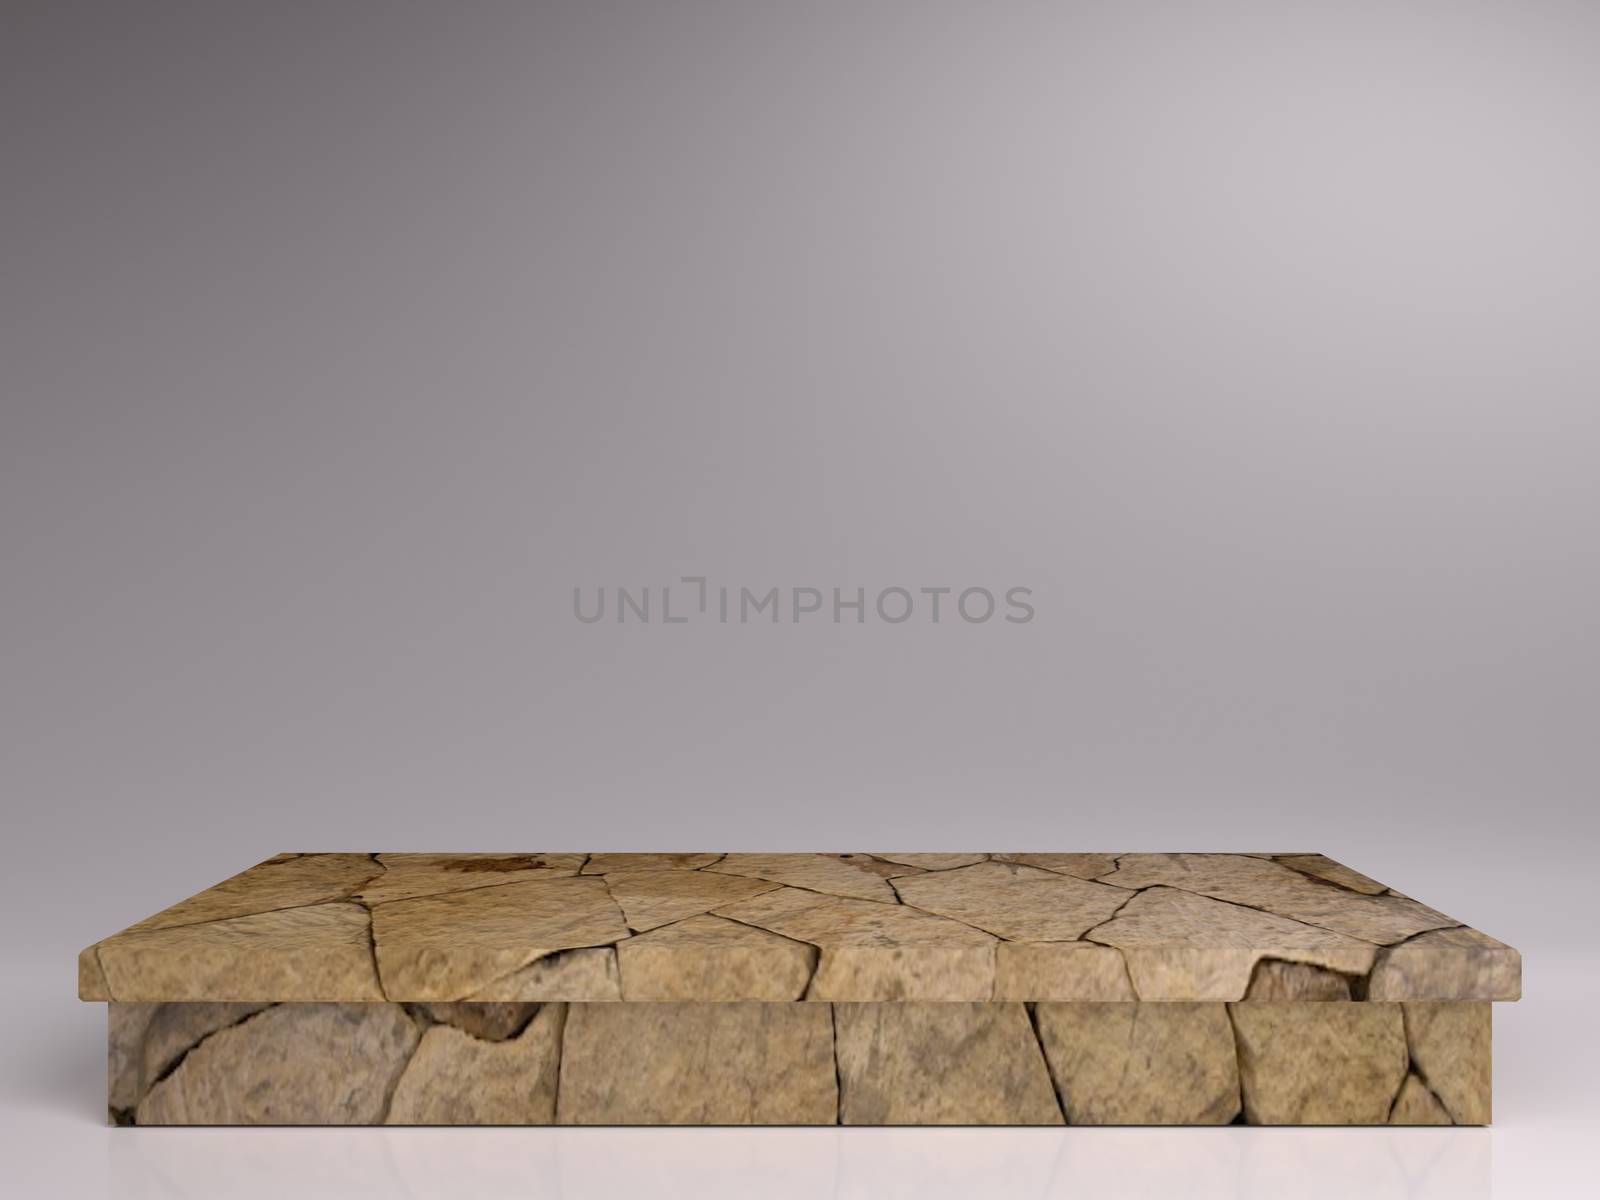 Pedestal Front View minimal podium modern space object clean simple design white 3d render stone light masonry